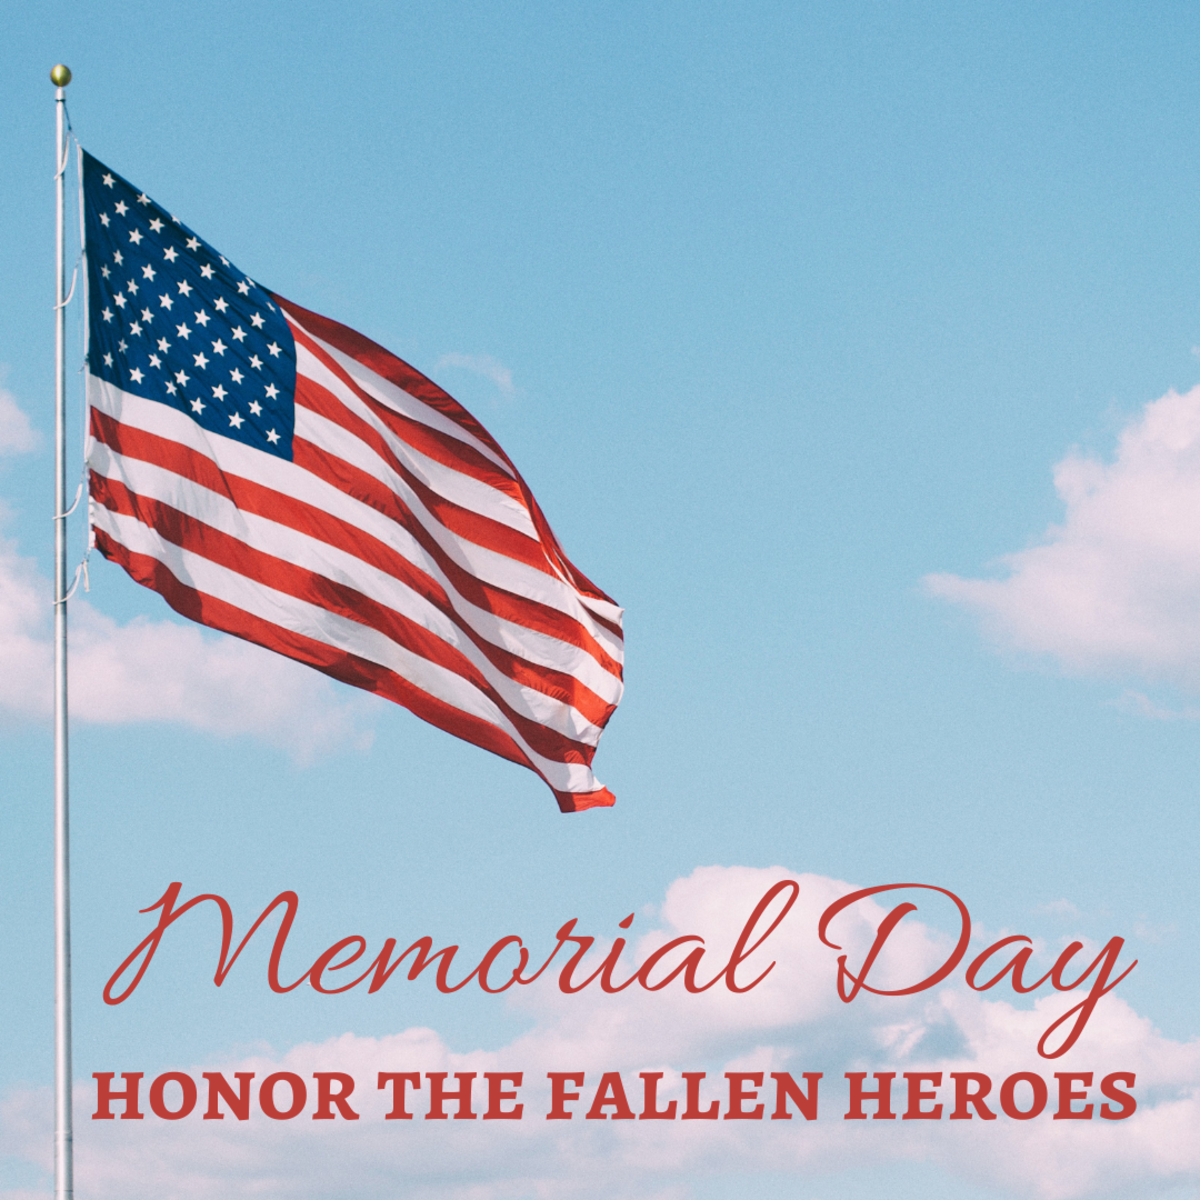 Memorial Day: A day dedicated to fallen heroes of all U.S. wars and service